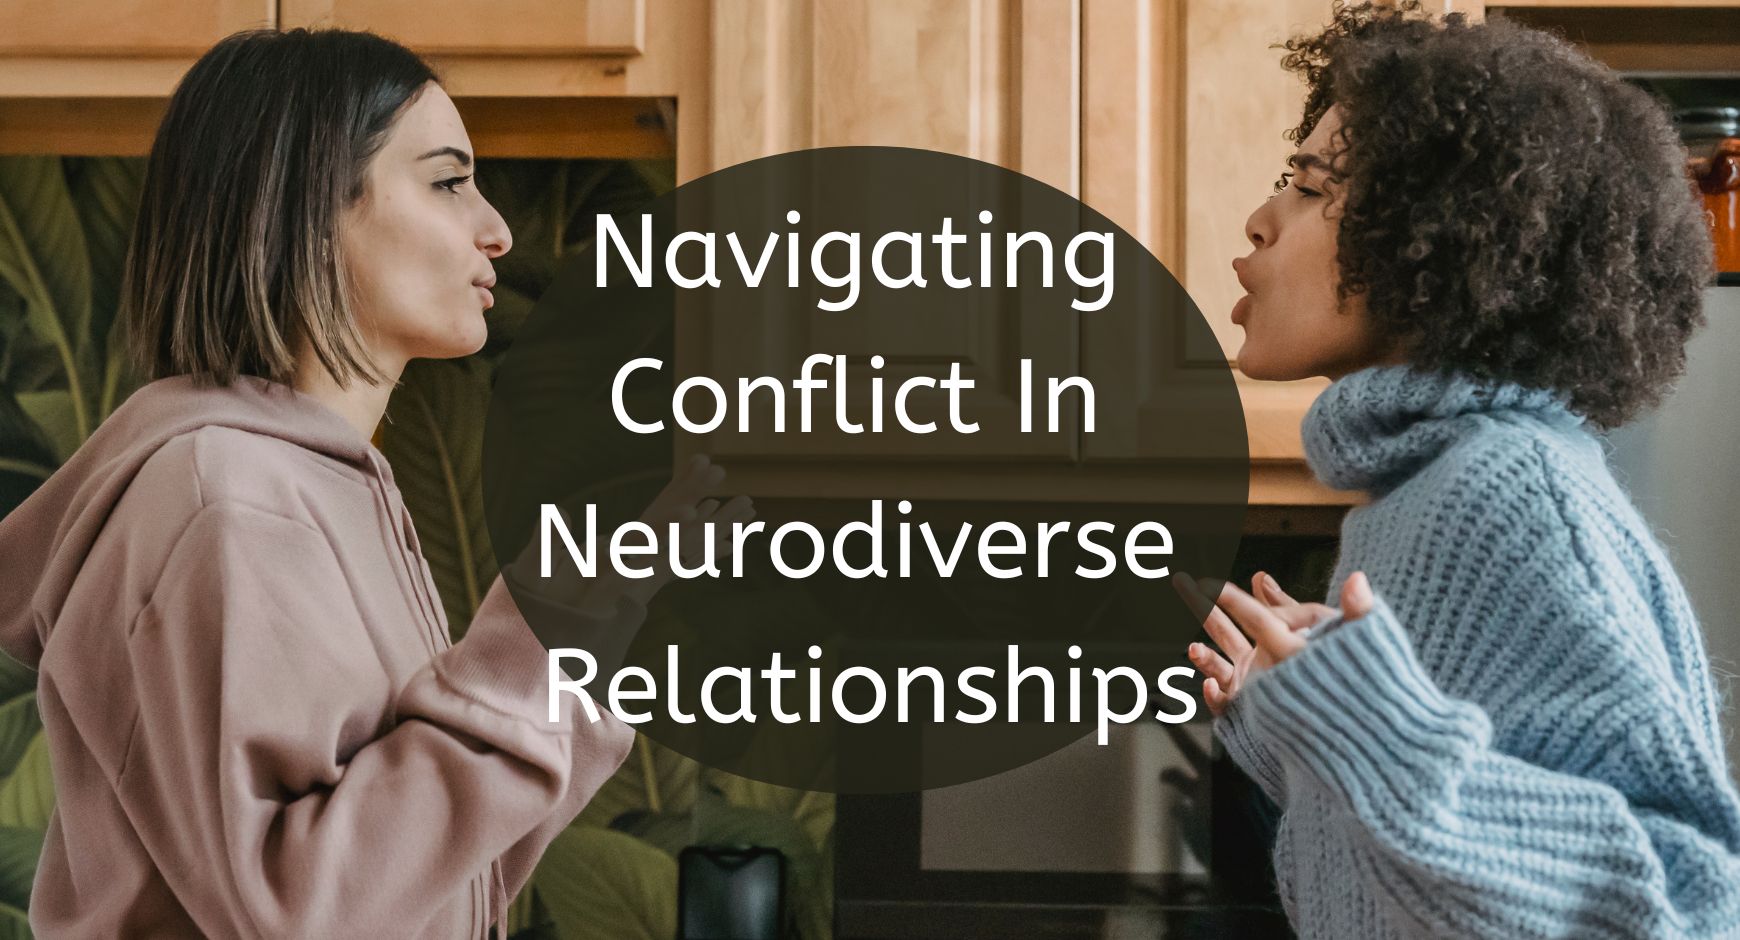 Two women facing each other looking agitated with words that read "Navigating Conflict In Neurodiverse Relationships"